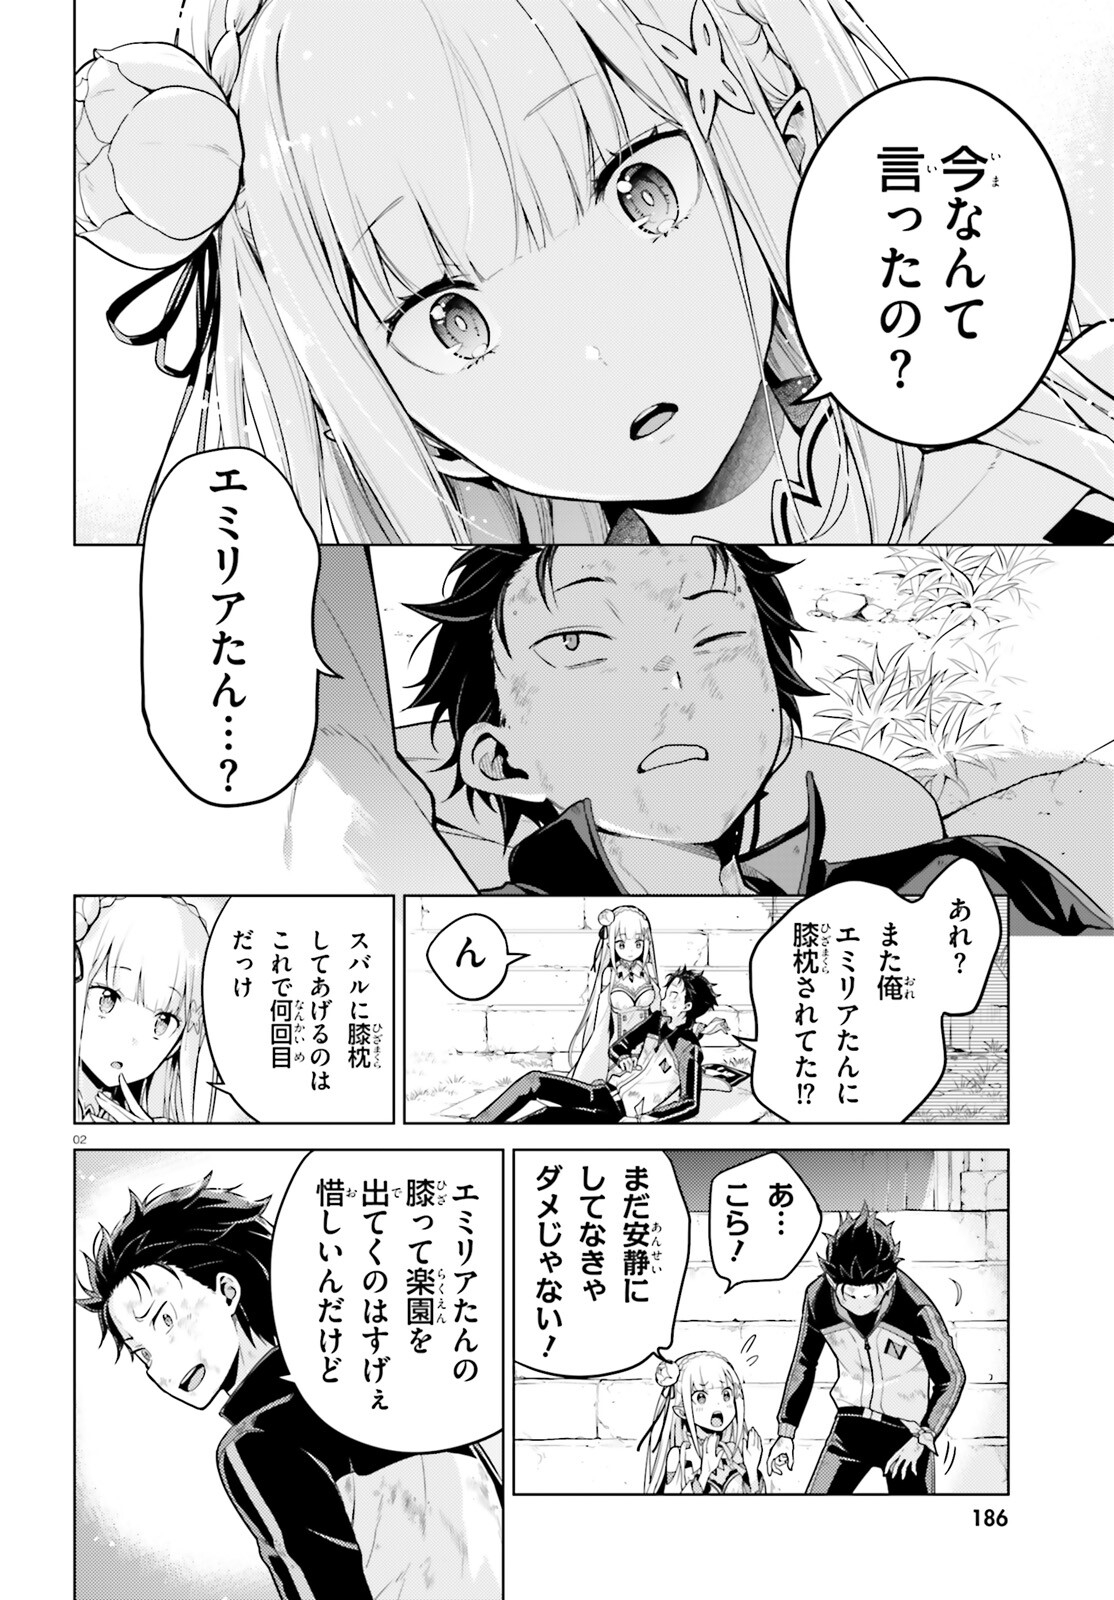 Reゼロから始める異世界生活 第四章 聖域と強欲の魔女 第49話 - Page 2